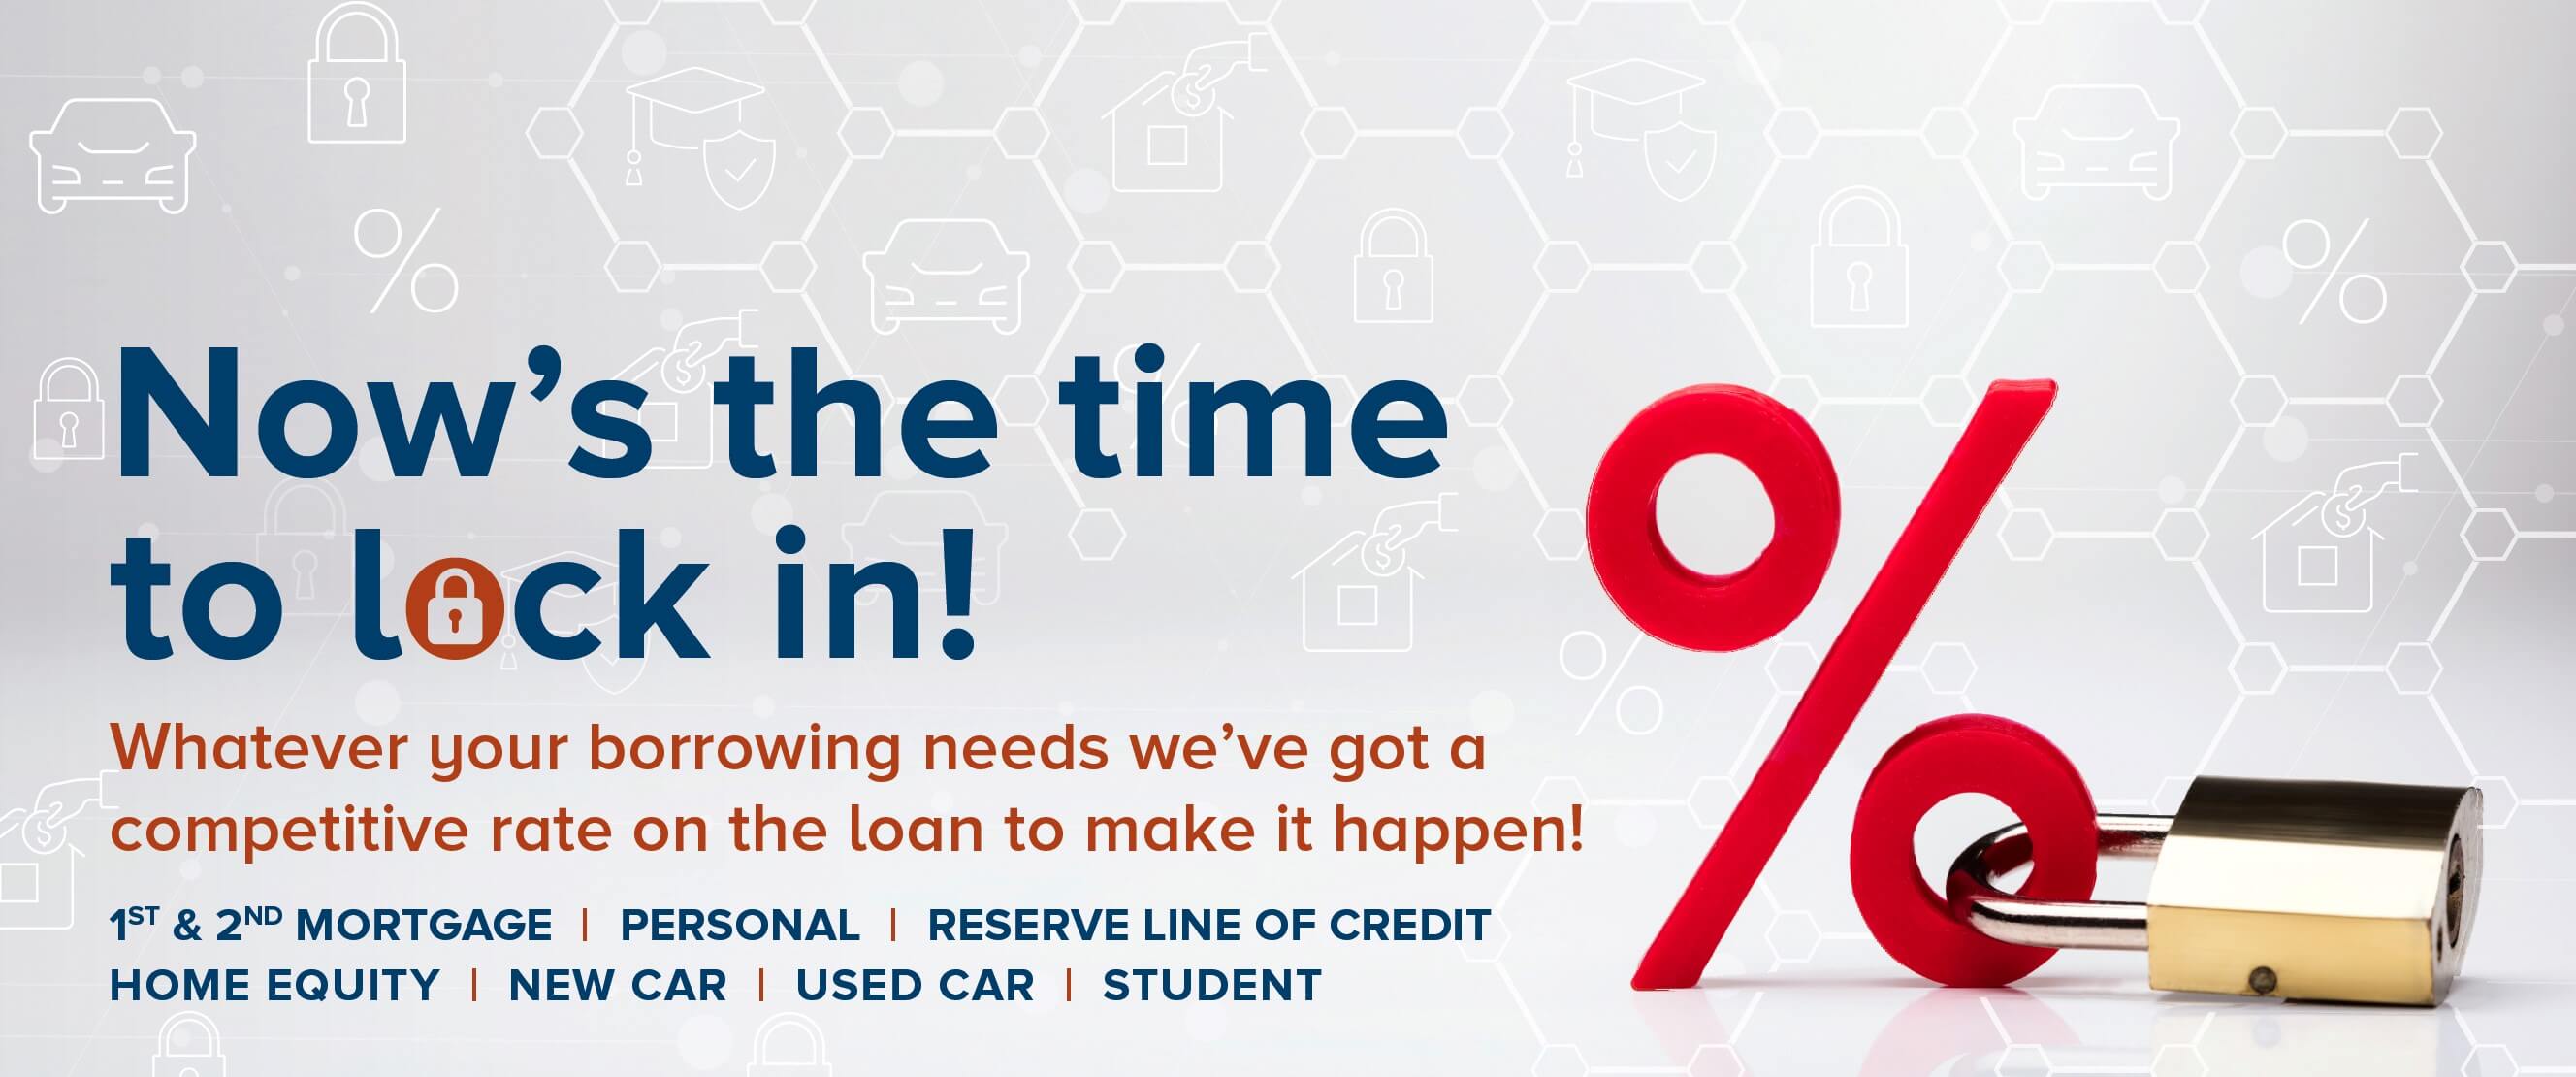 Now's the time to lock in! Whatever your borrowing needs we've got a competitive rate on the loan to make it happen! 1st & 2nd Mortgage, Personal, Reserve Line of Credit, Home Equity, New Car, Used Car, Student